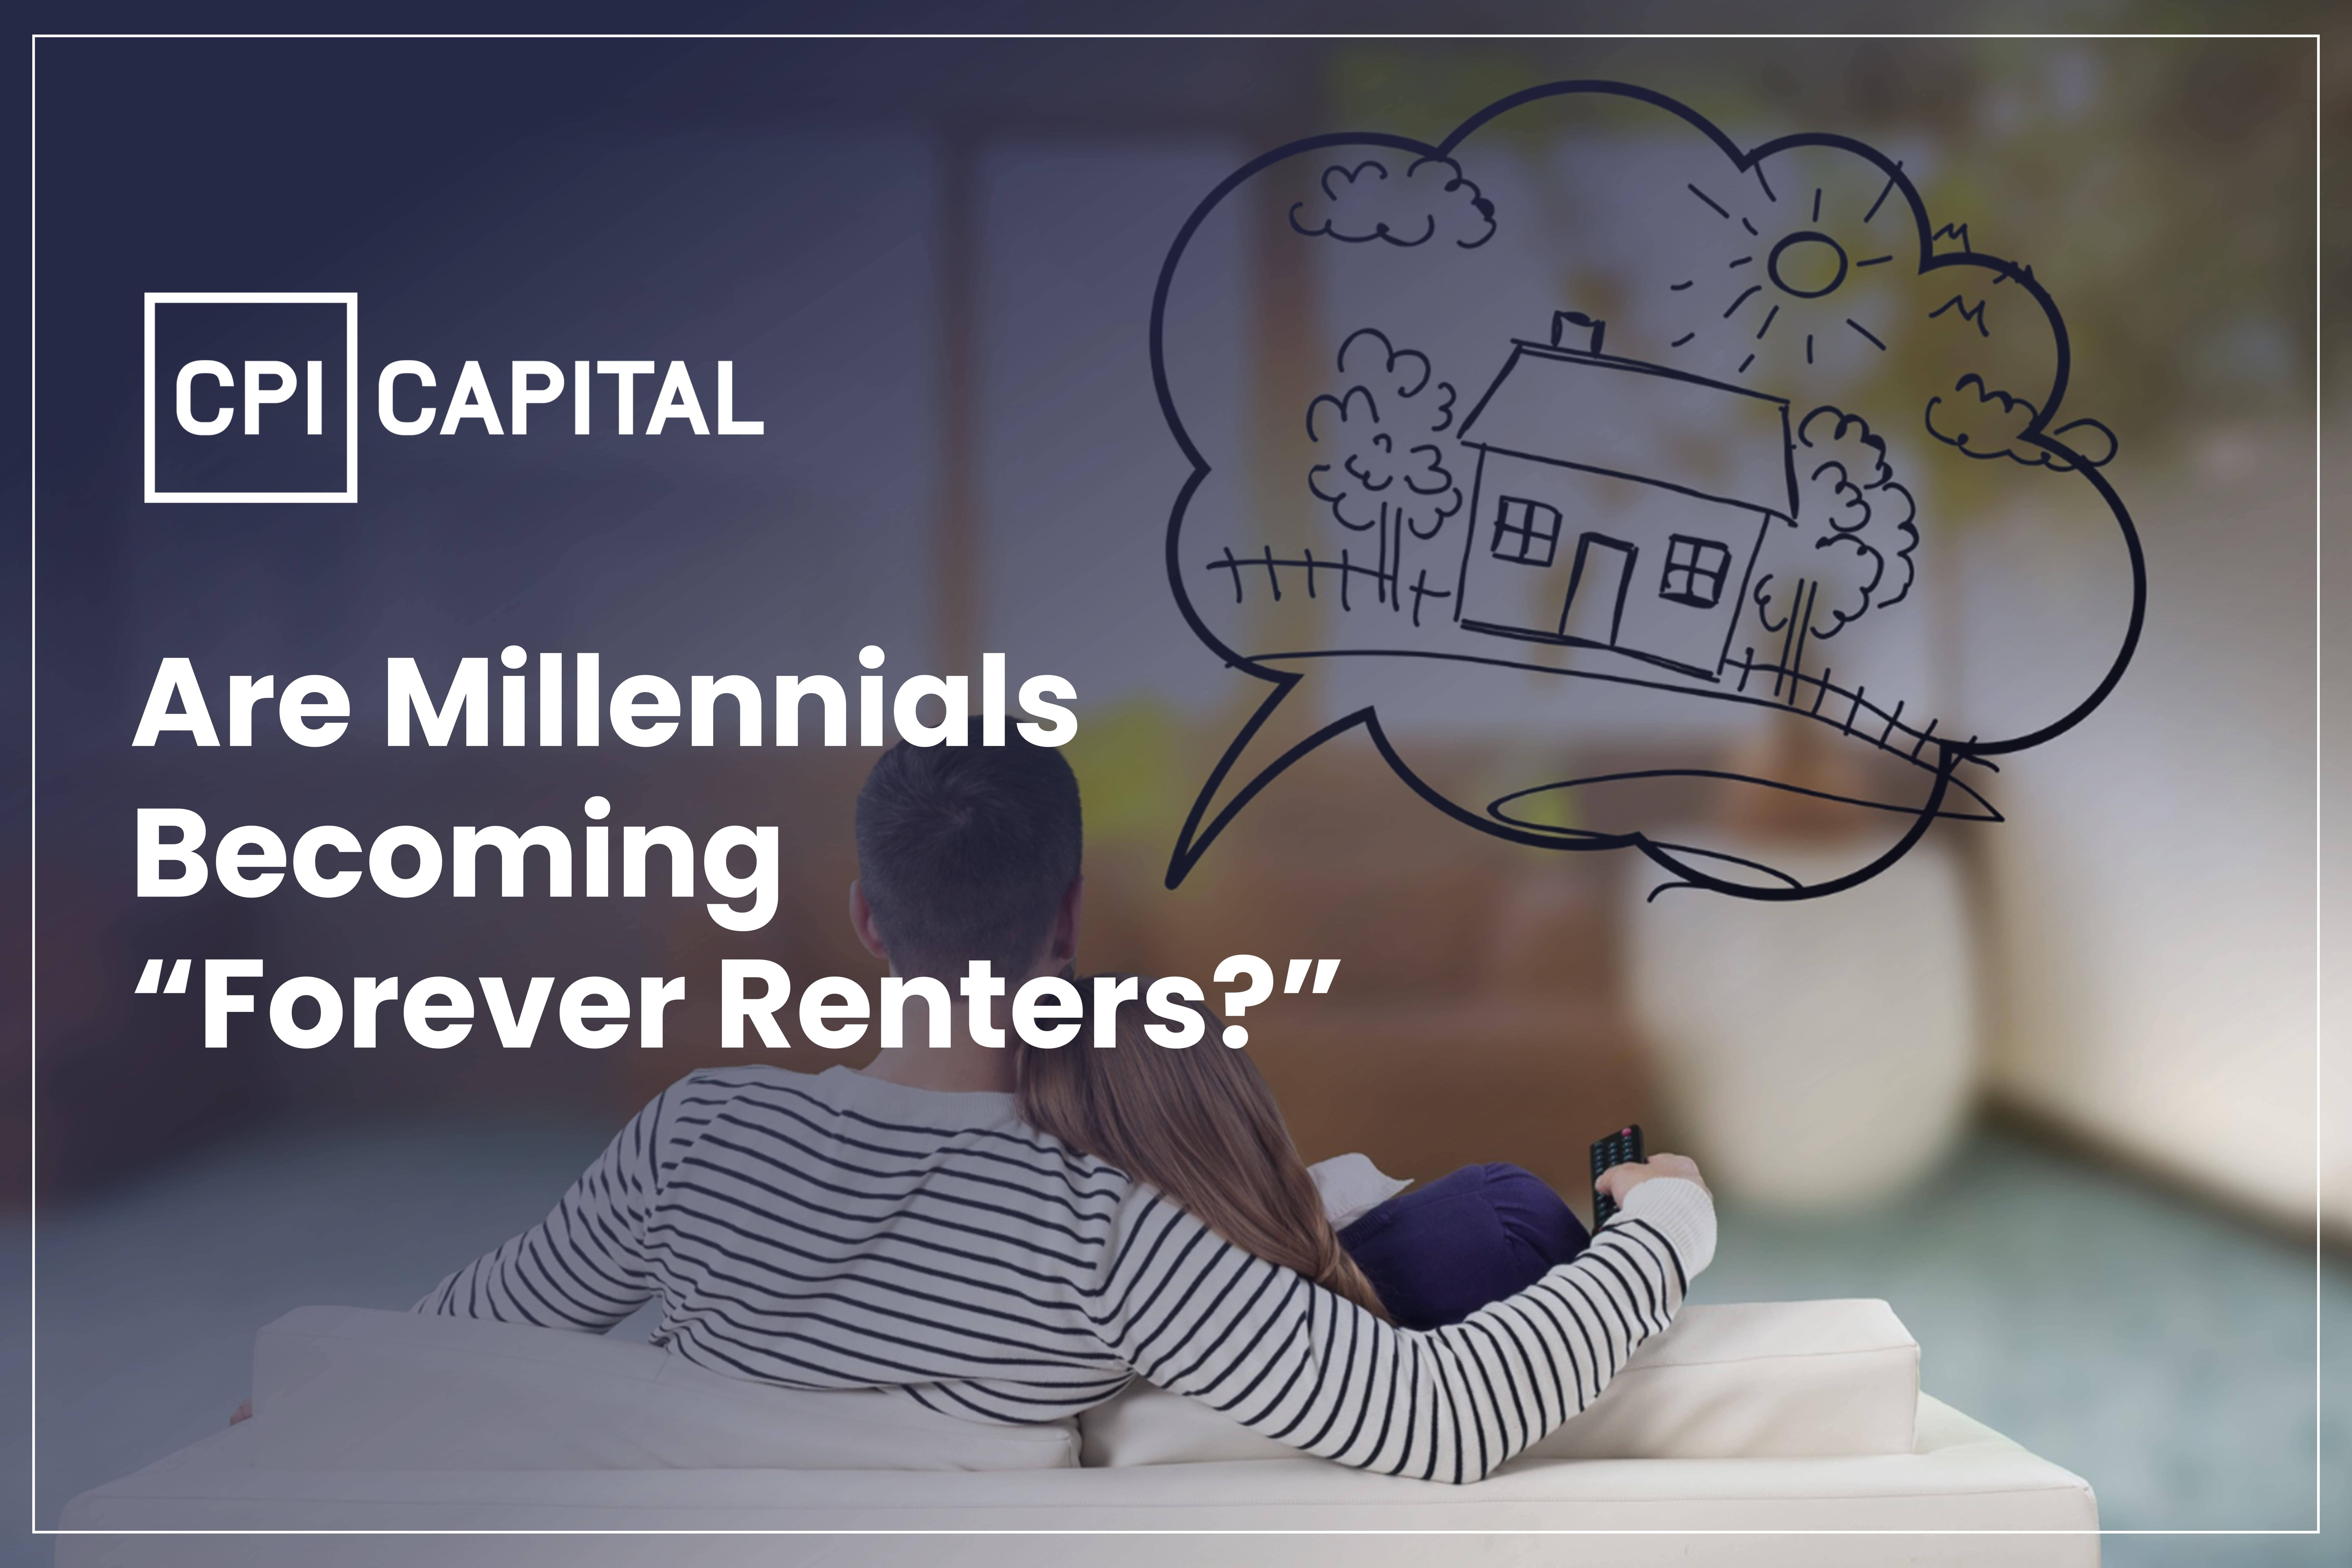 Are Millennials Becoming “Forever Renters?”